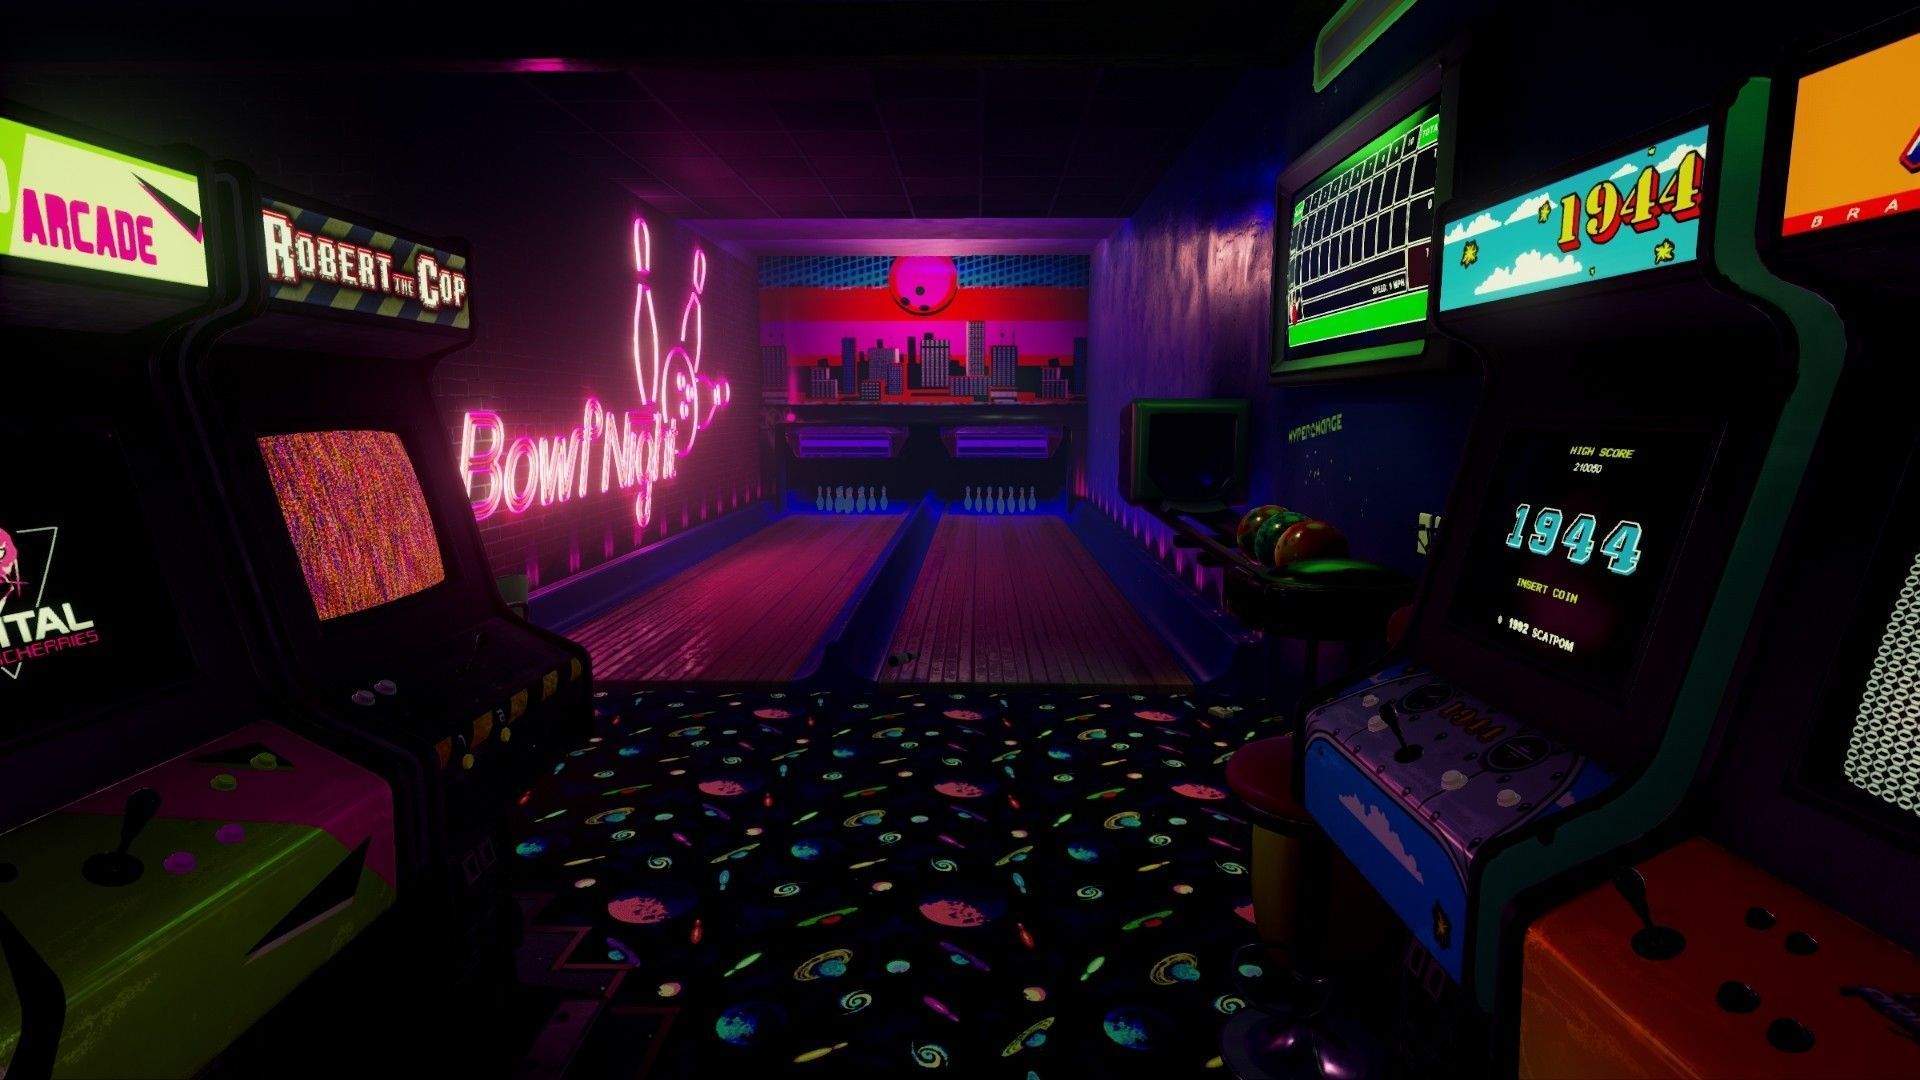 A dark room with video games and neon lights - Arcade